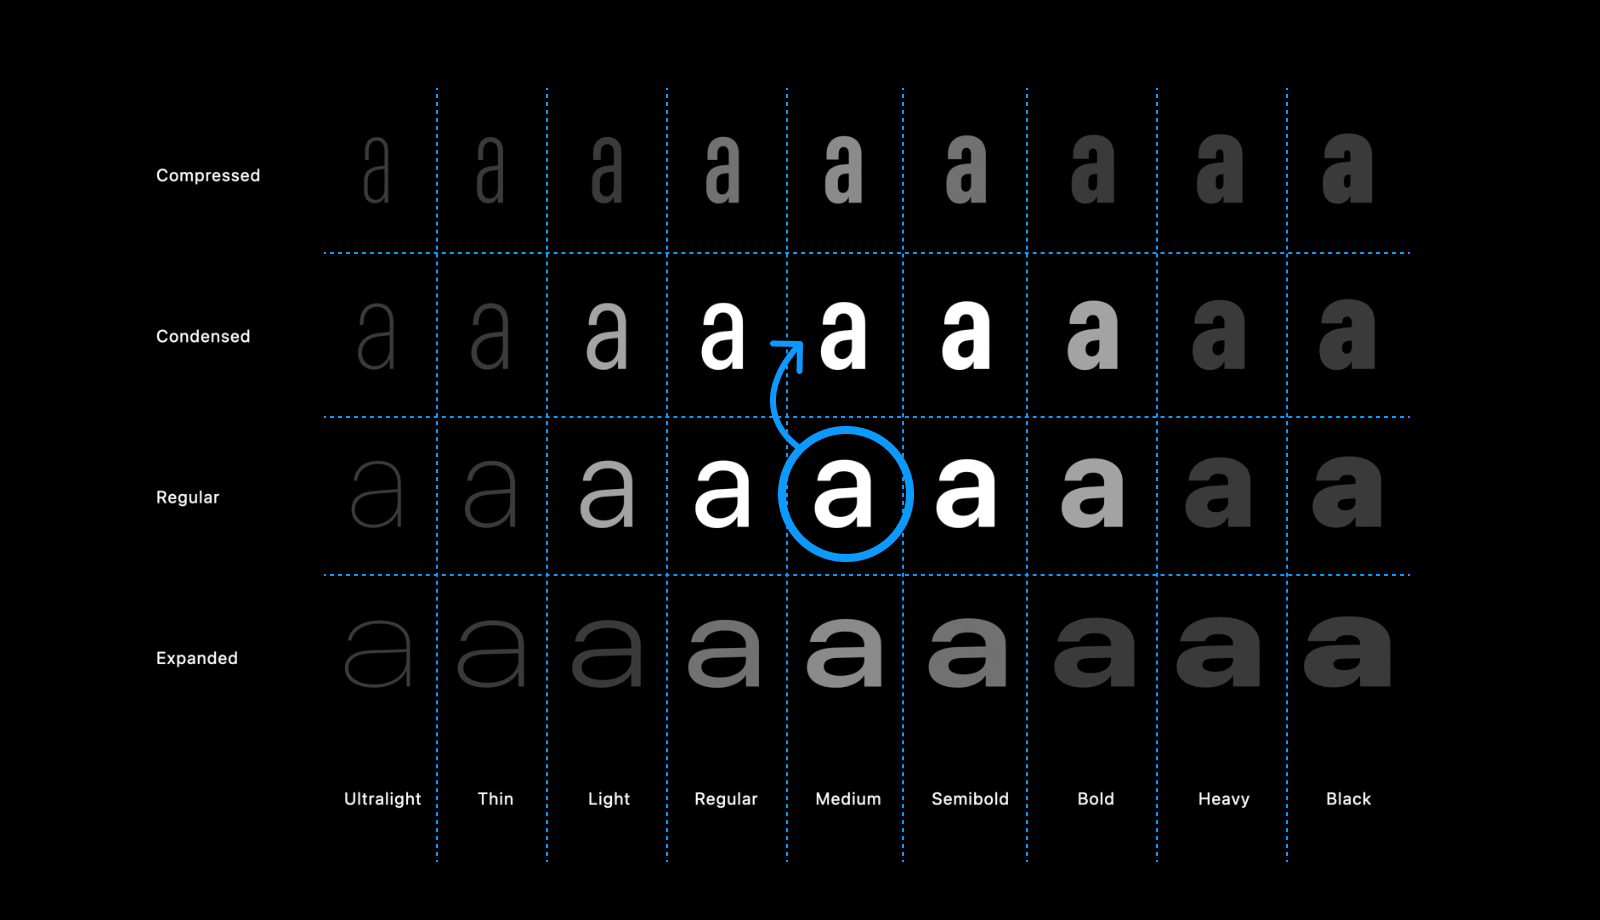 A 9x4 grid of the letter 'a' set in San Francisco but in varying weights and families. The middle letter 'a' is highlighted and has an arrow drawn to an adjacent cell in the row above it.